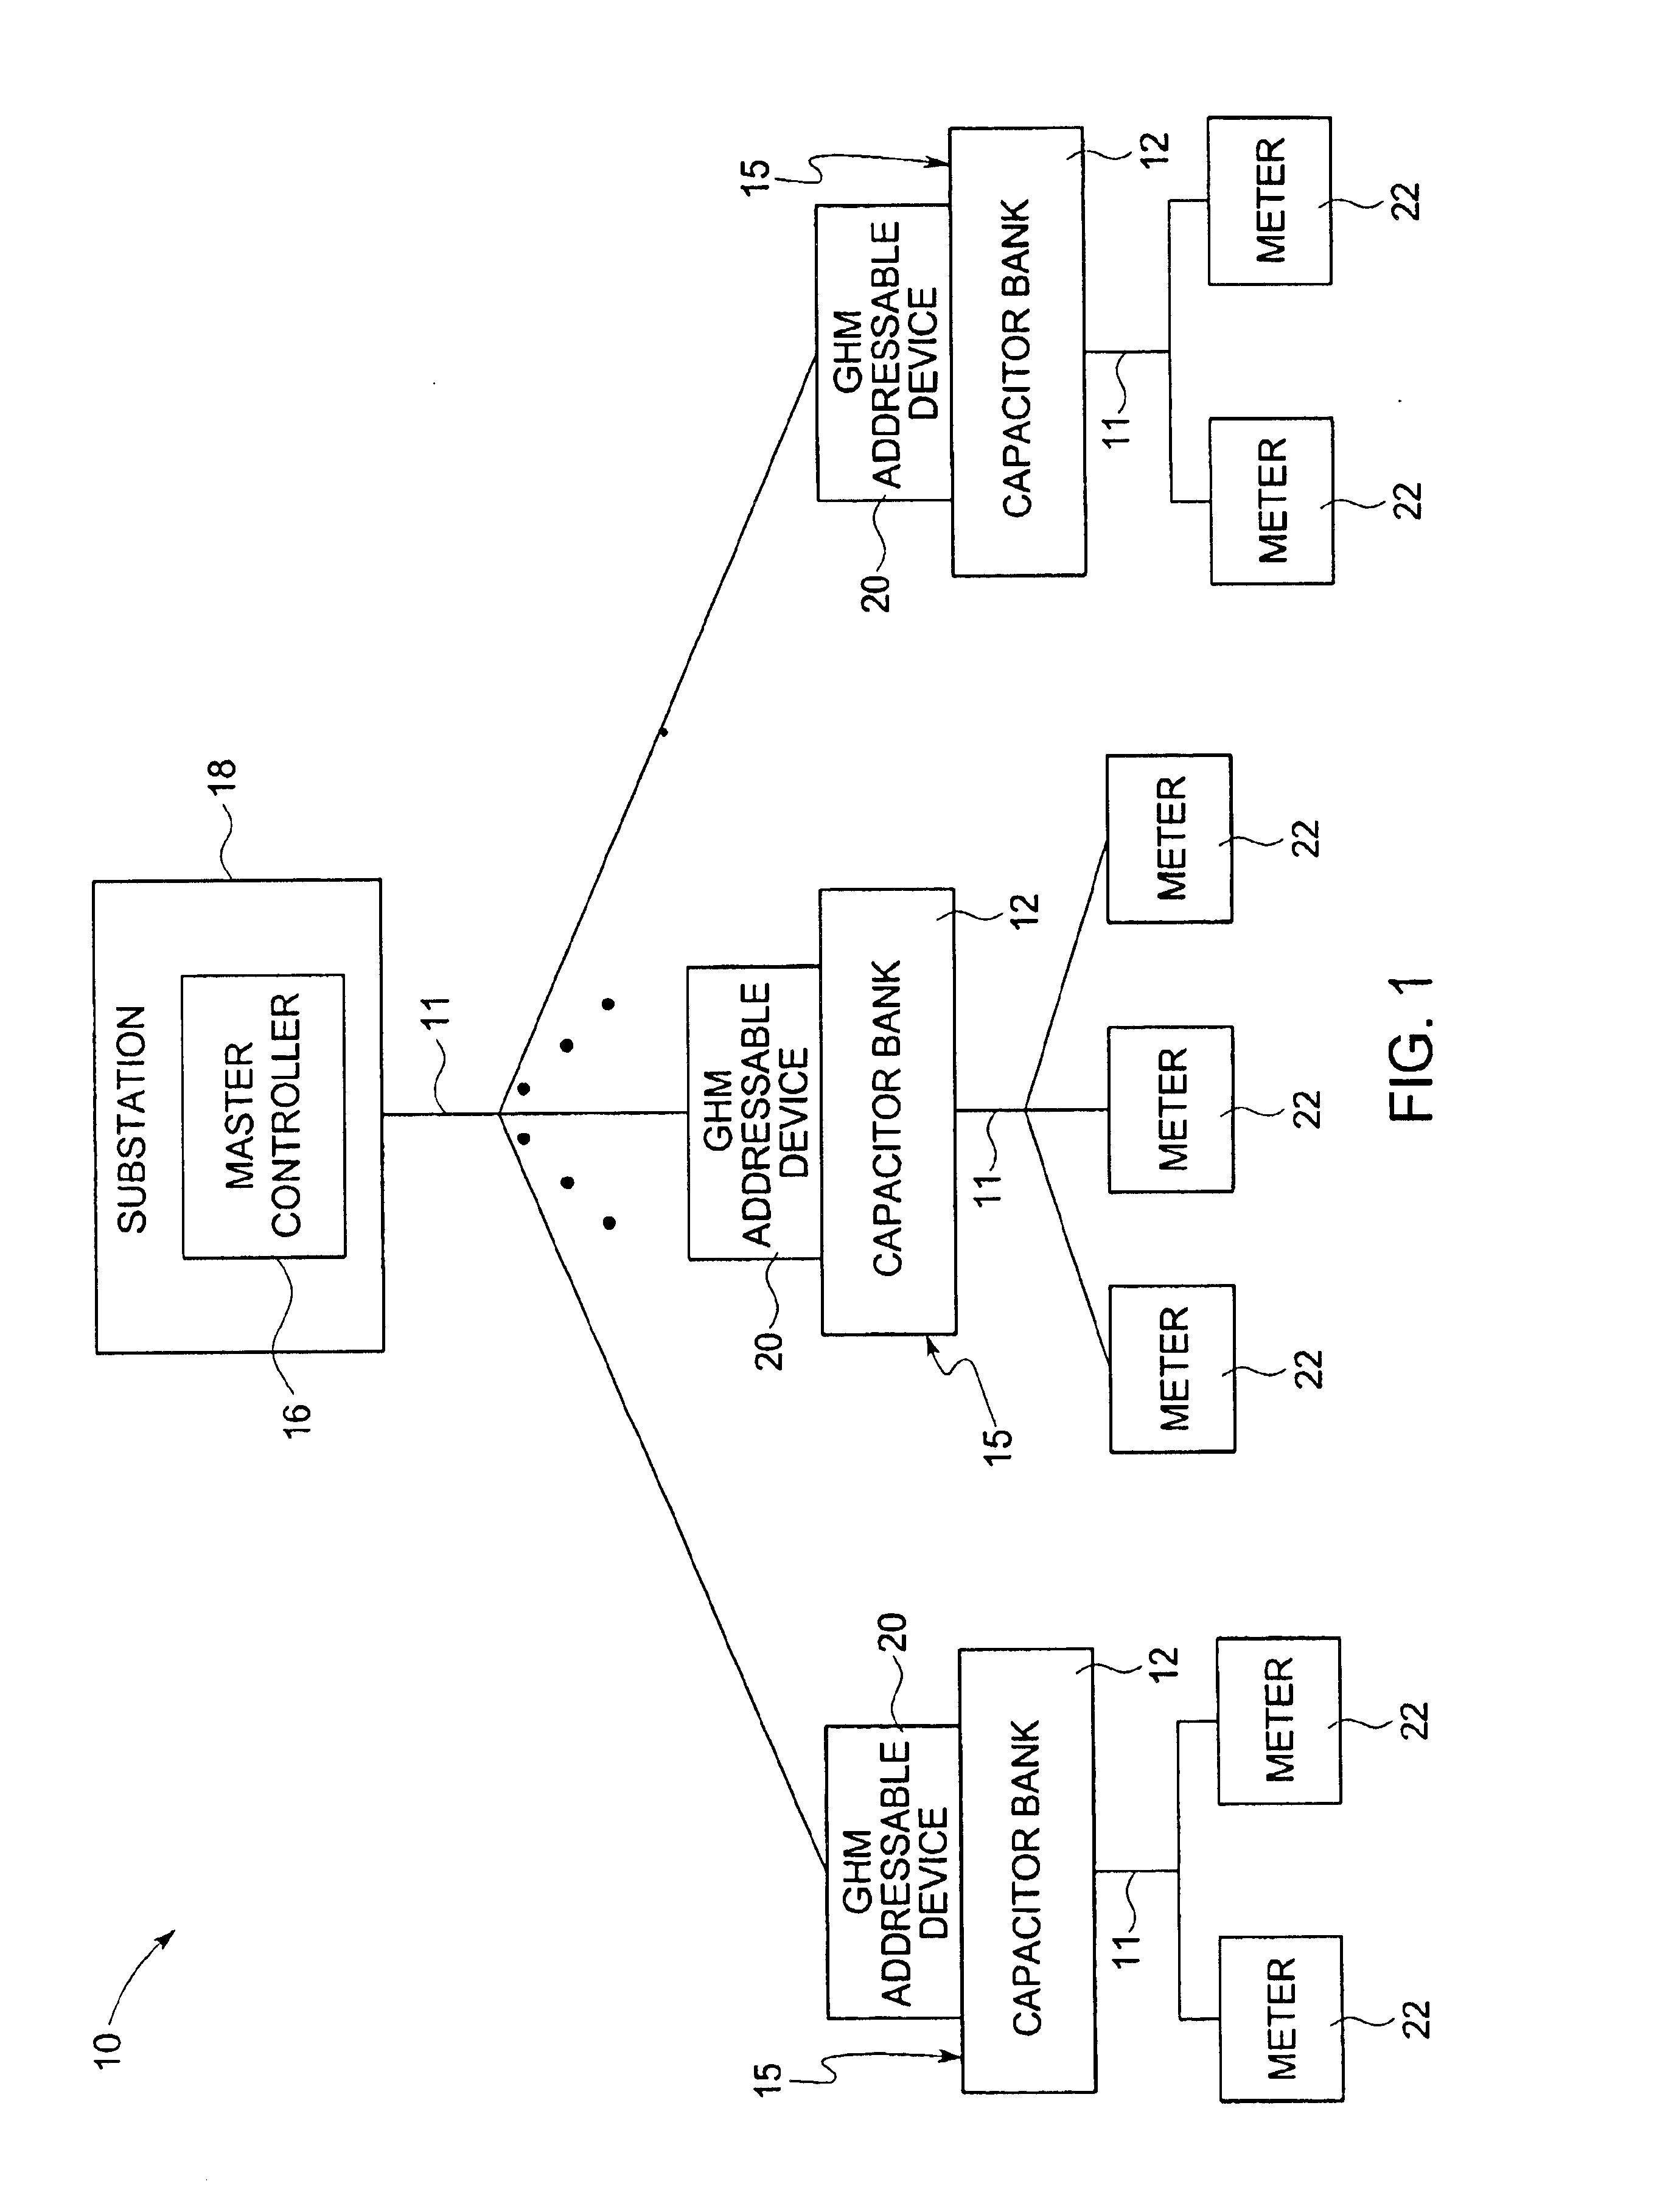 Apparatus and method for reconfiguring a power line communication system